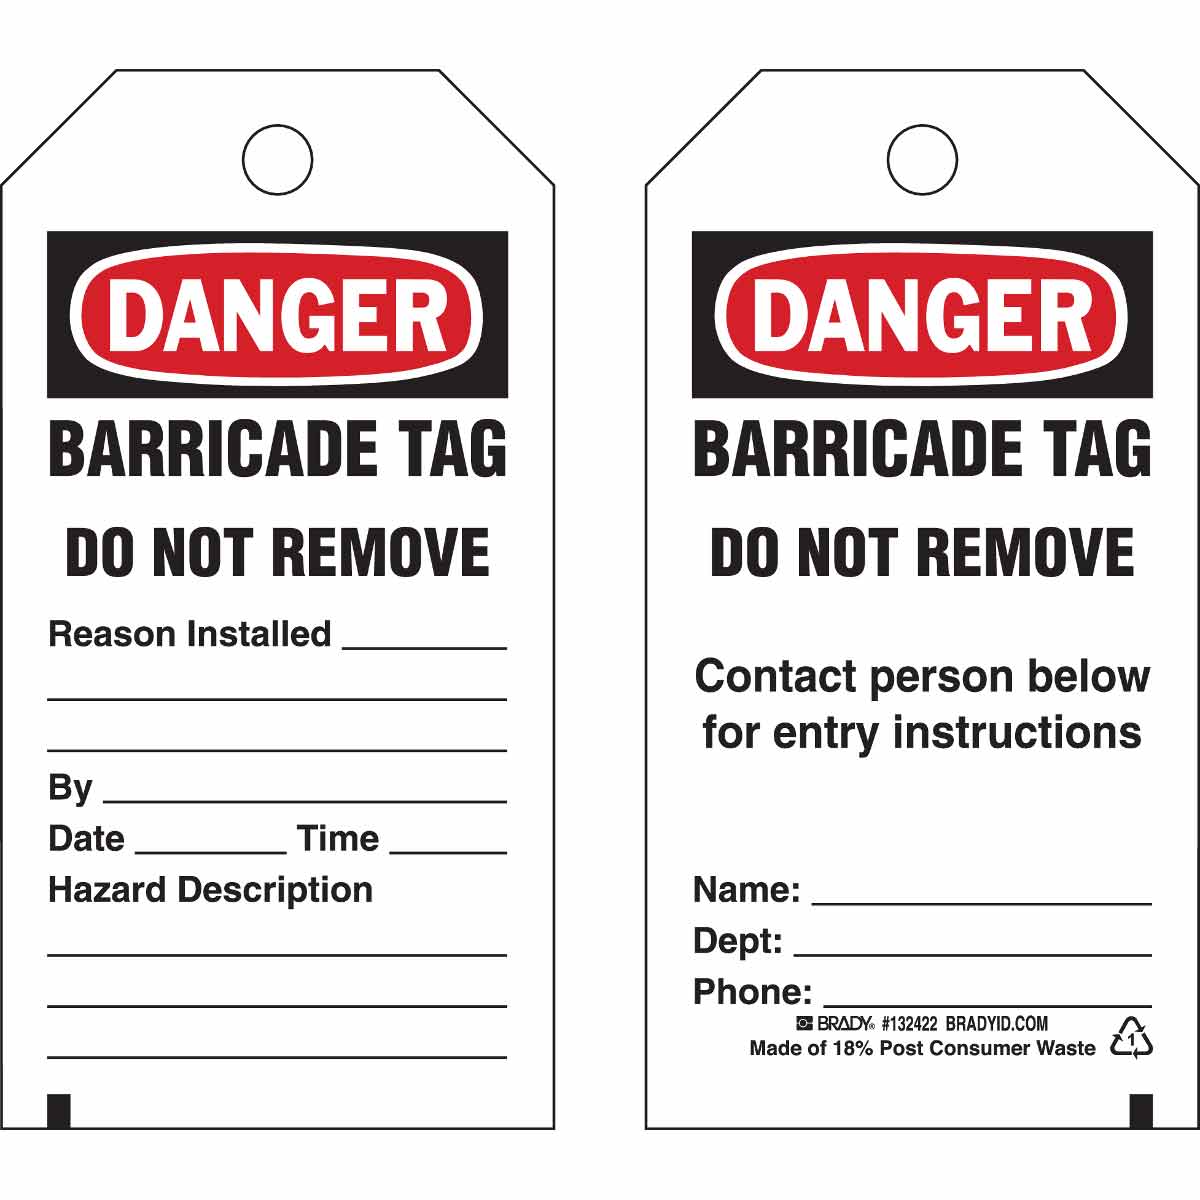 "BARRICADE TAPE DO NOT REMOVE" TAG